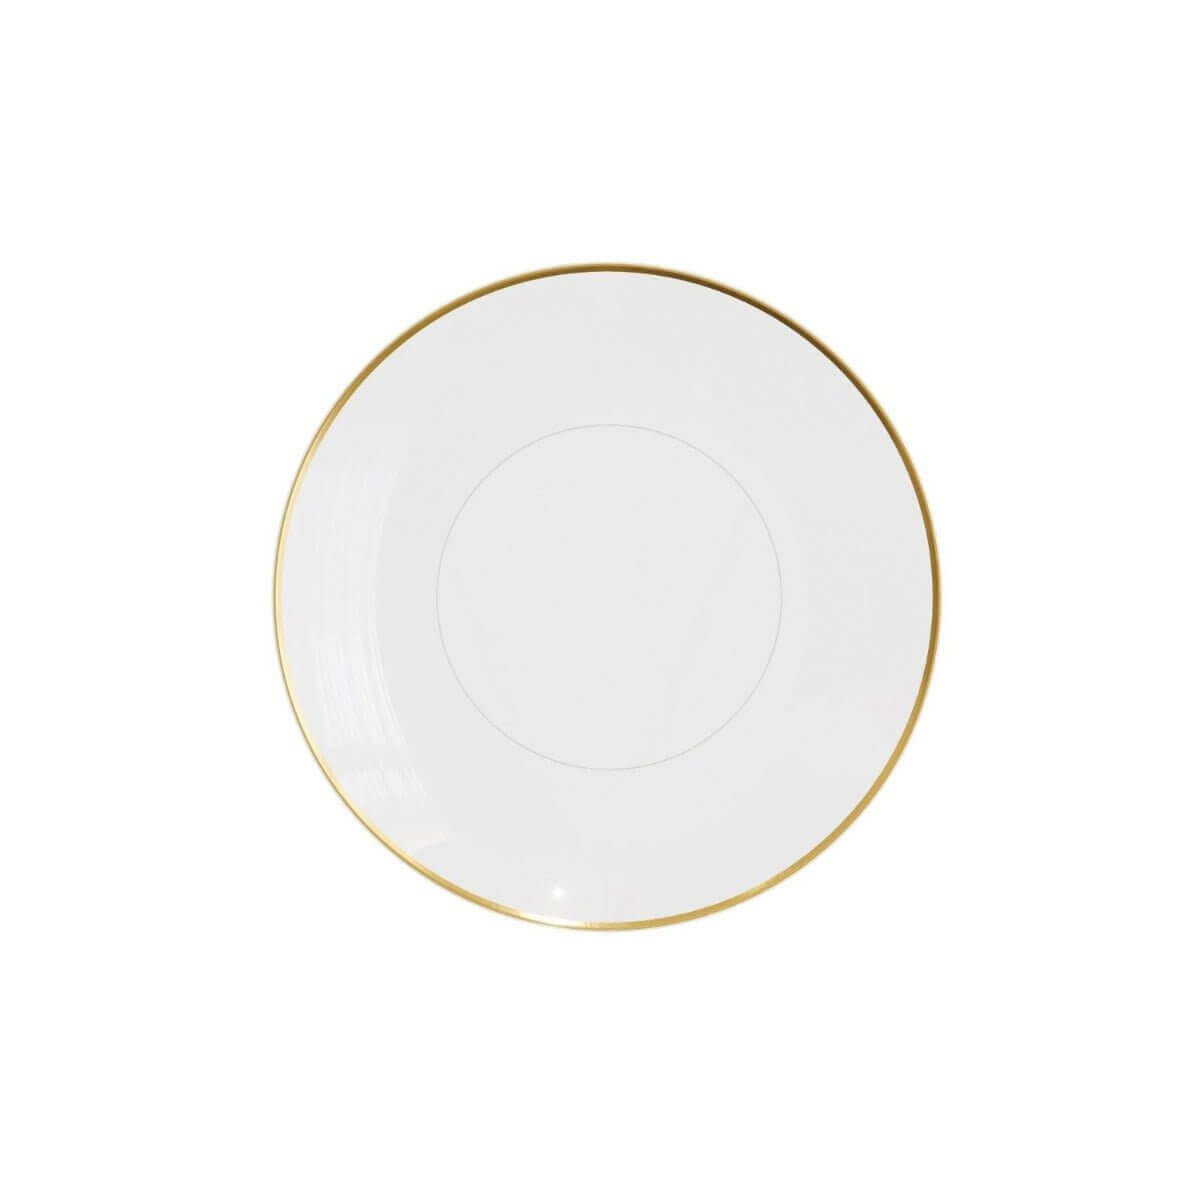 6" Clear With Gold Rim Plastic Plates (40 Count) - Yom Tov Settings